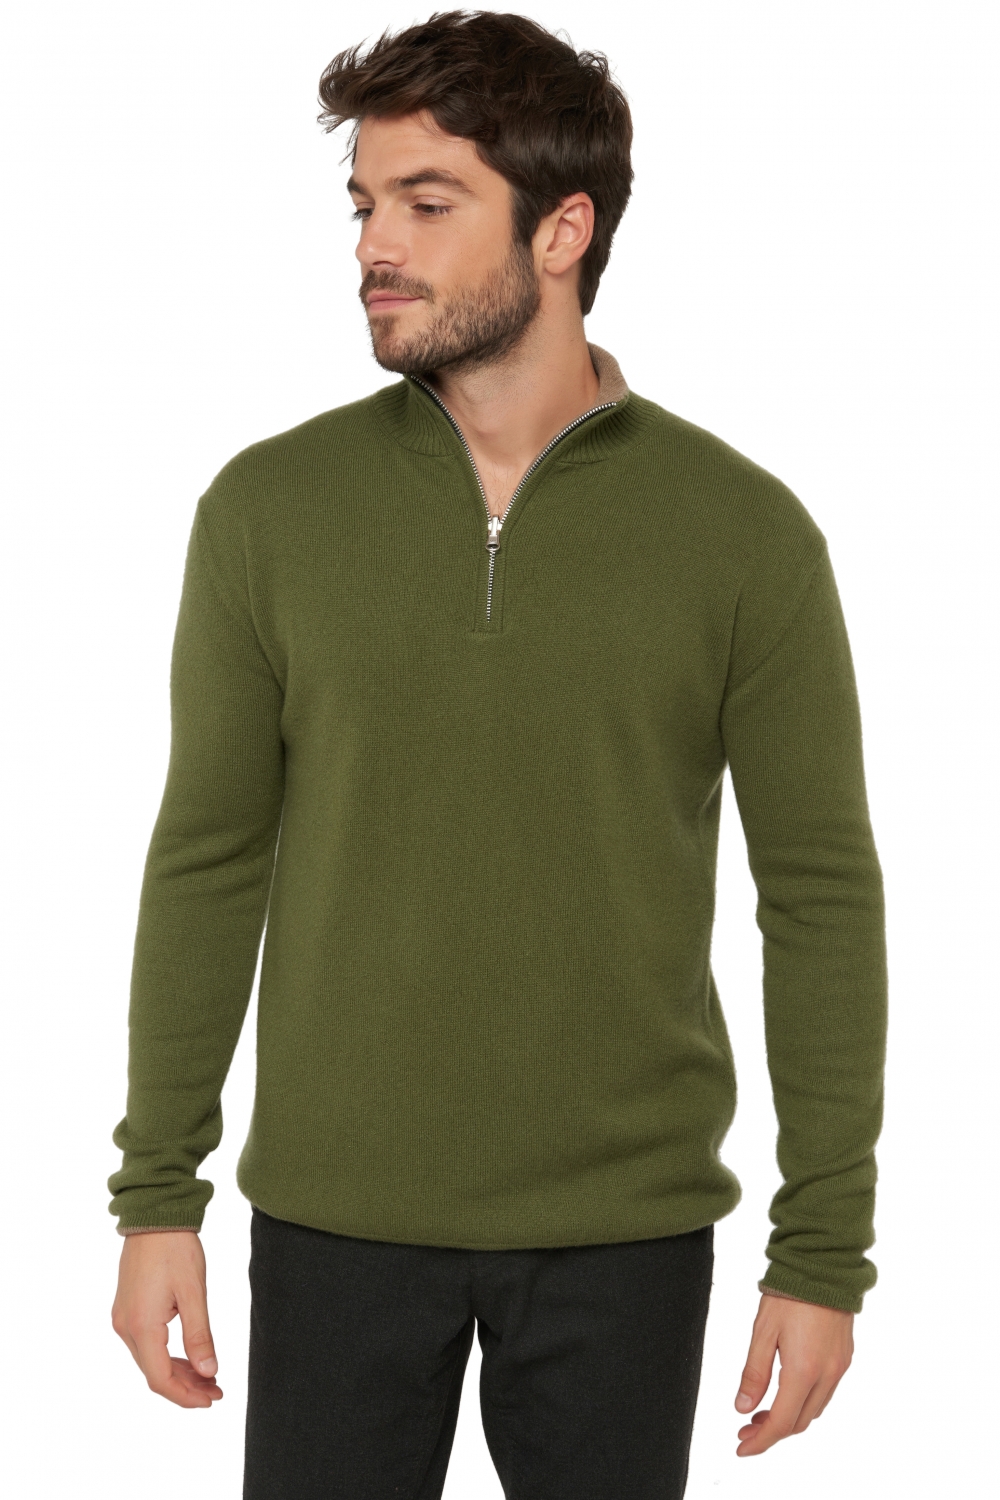 Cashmere men chunky sweater cilio ivy green natural brown 3xl